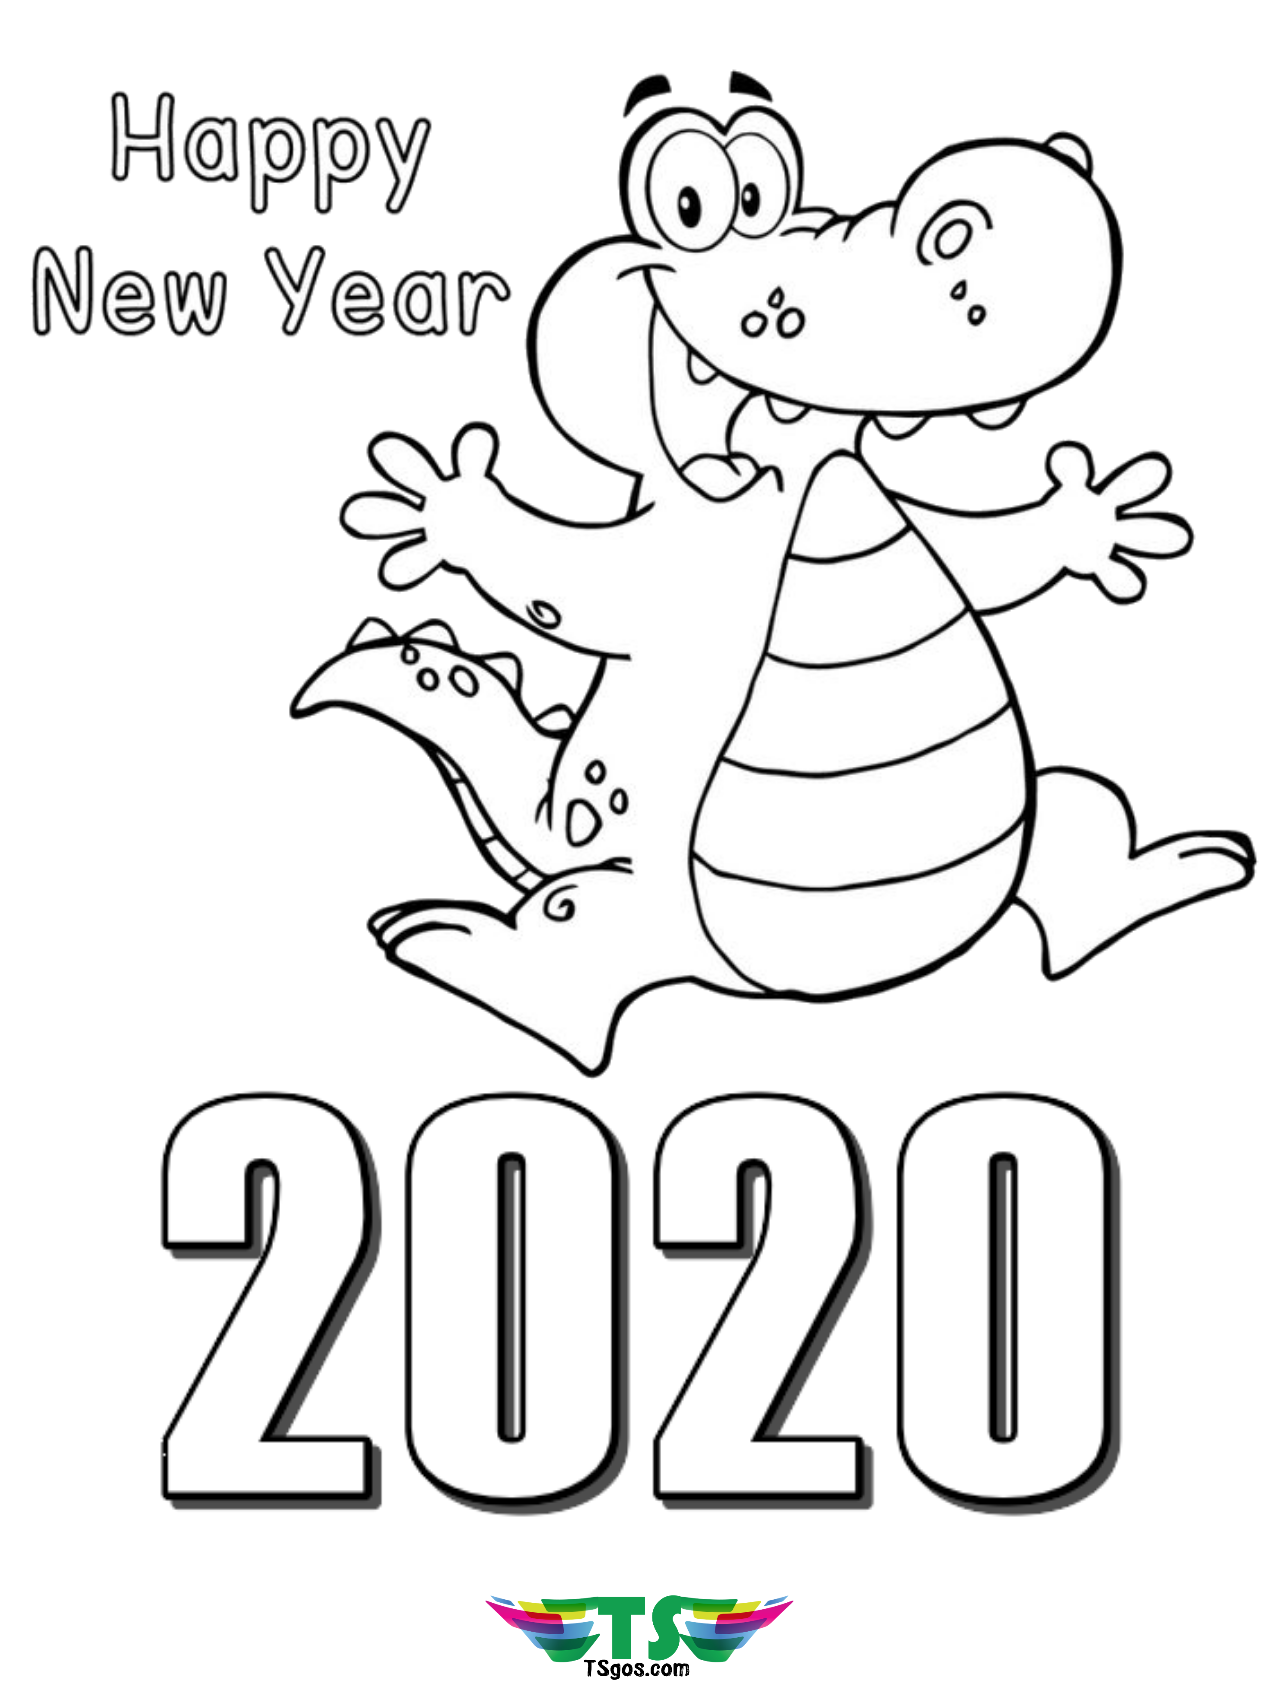 Happy New Year 2020 coloring page.